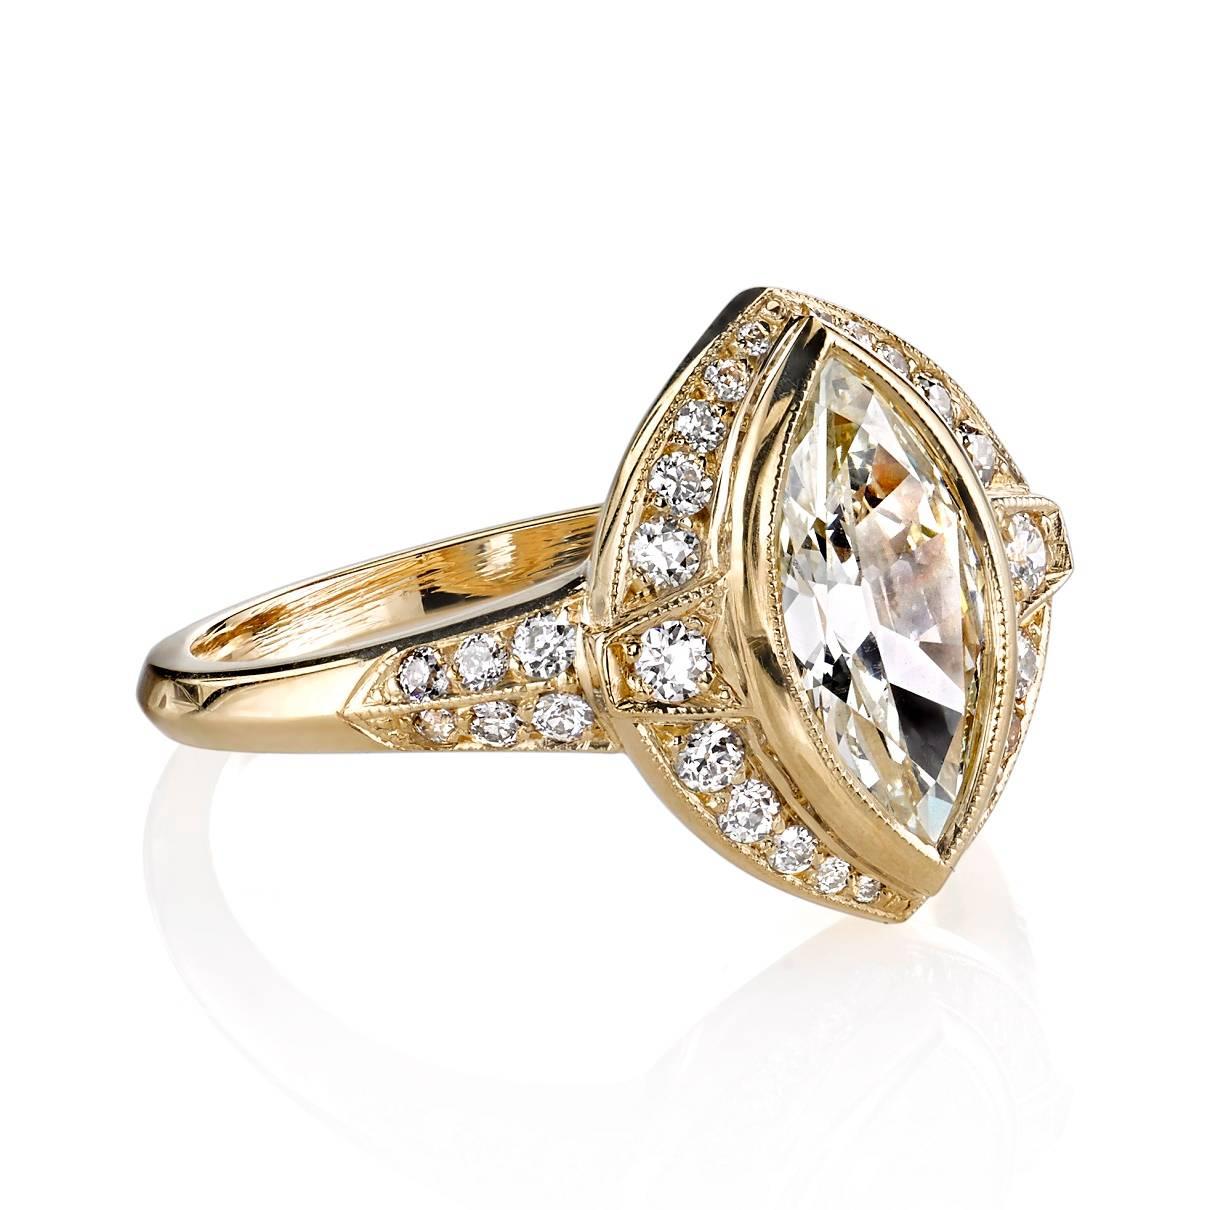 1.09ct L/VS2 GIA certified Marquise cut diamond set in a handcrafted 18k yellow gold mounting.